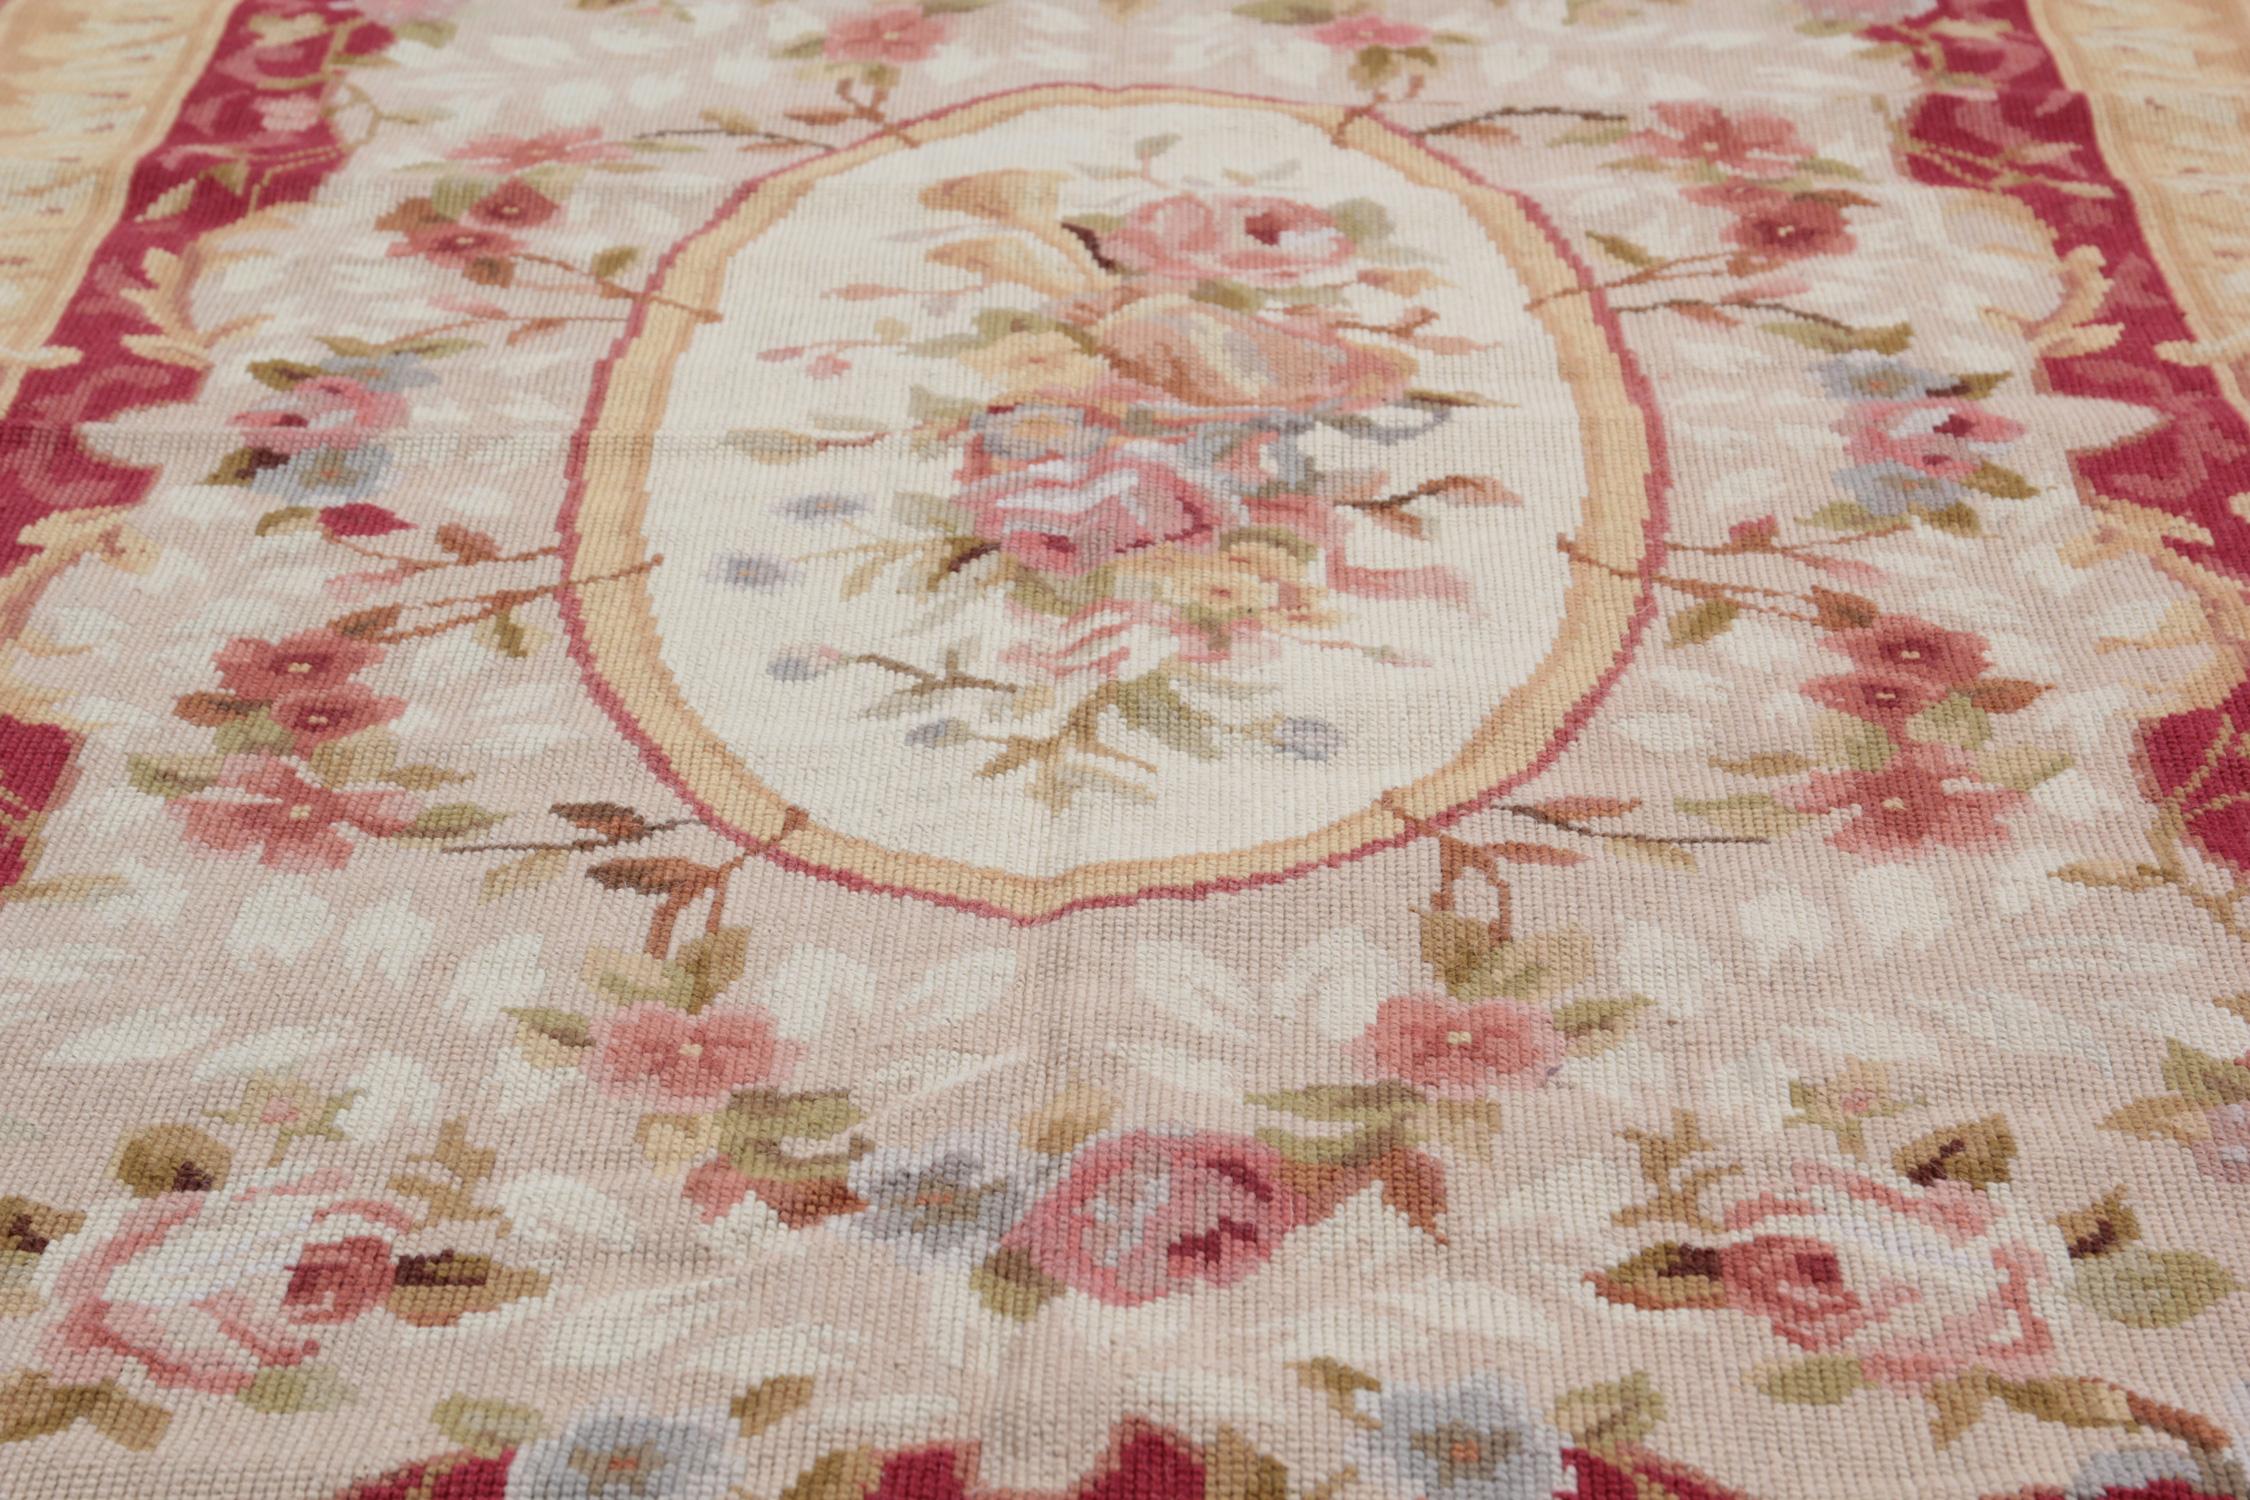 Chinese Luxury Red Rug, Floral Aubusson Style Rugs, Needlepoint Carpet Flat-Weave Rug